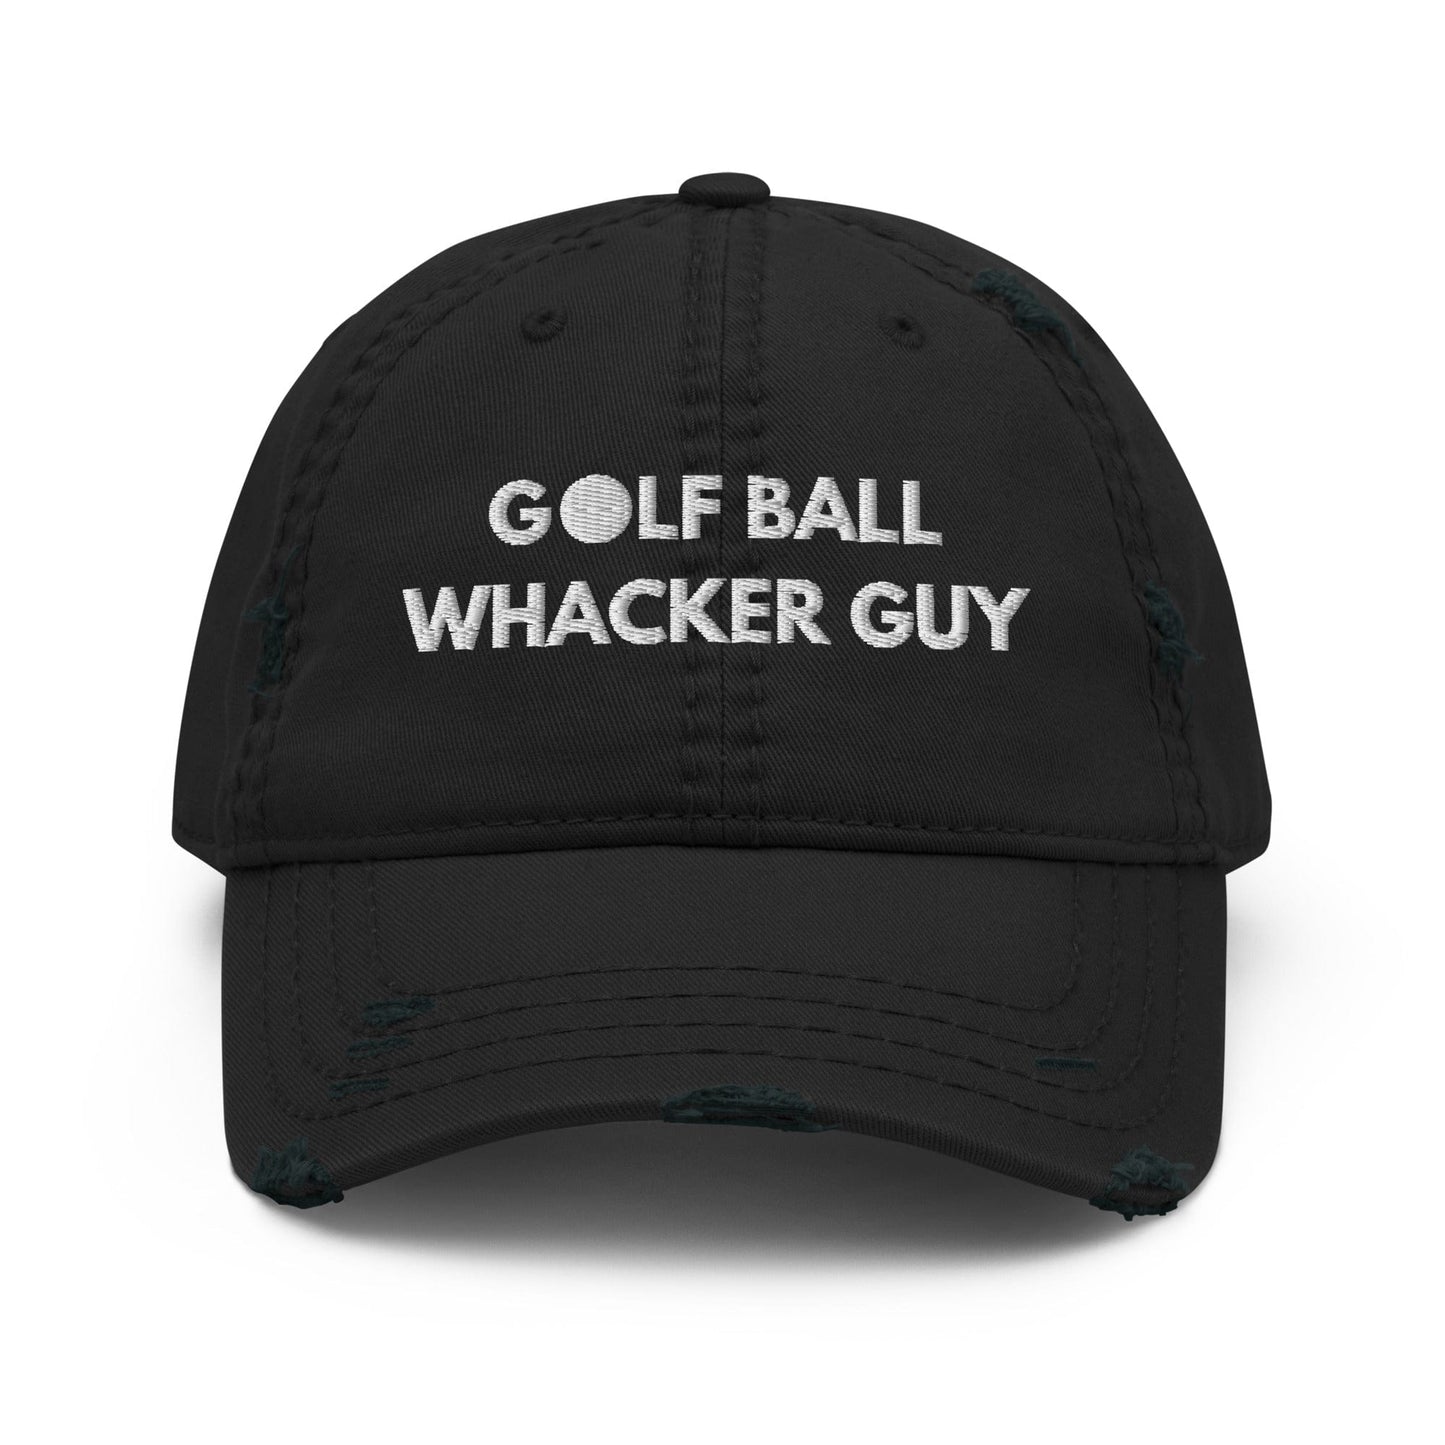 Funny Golfer Gifts  Distressed Cap Black Golf Ball Whacker Guy Hat Distressed Hat